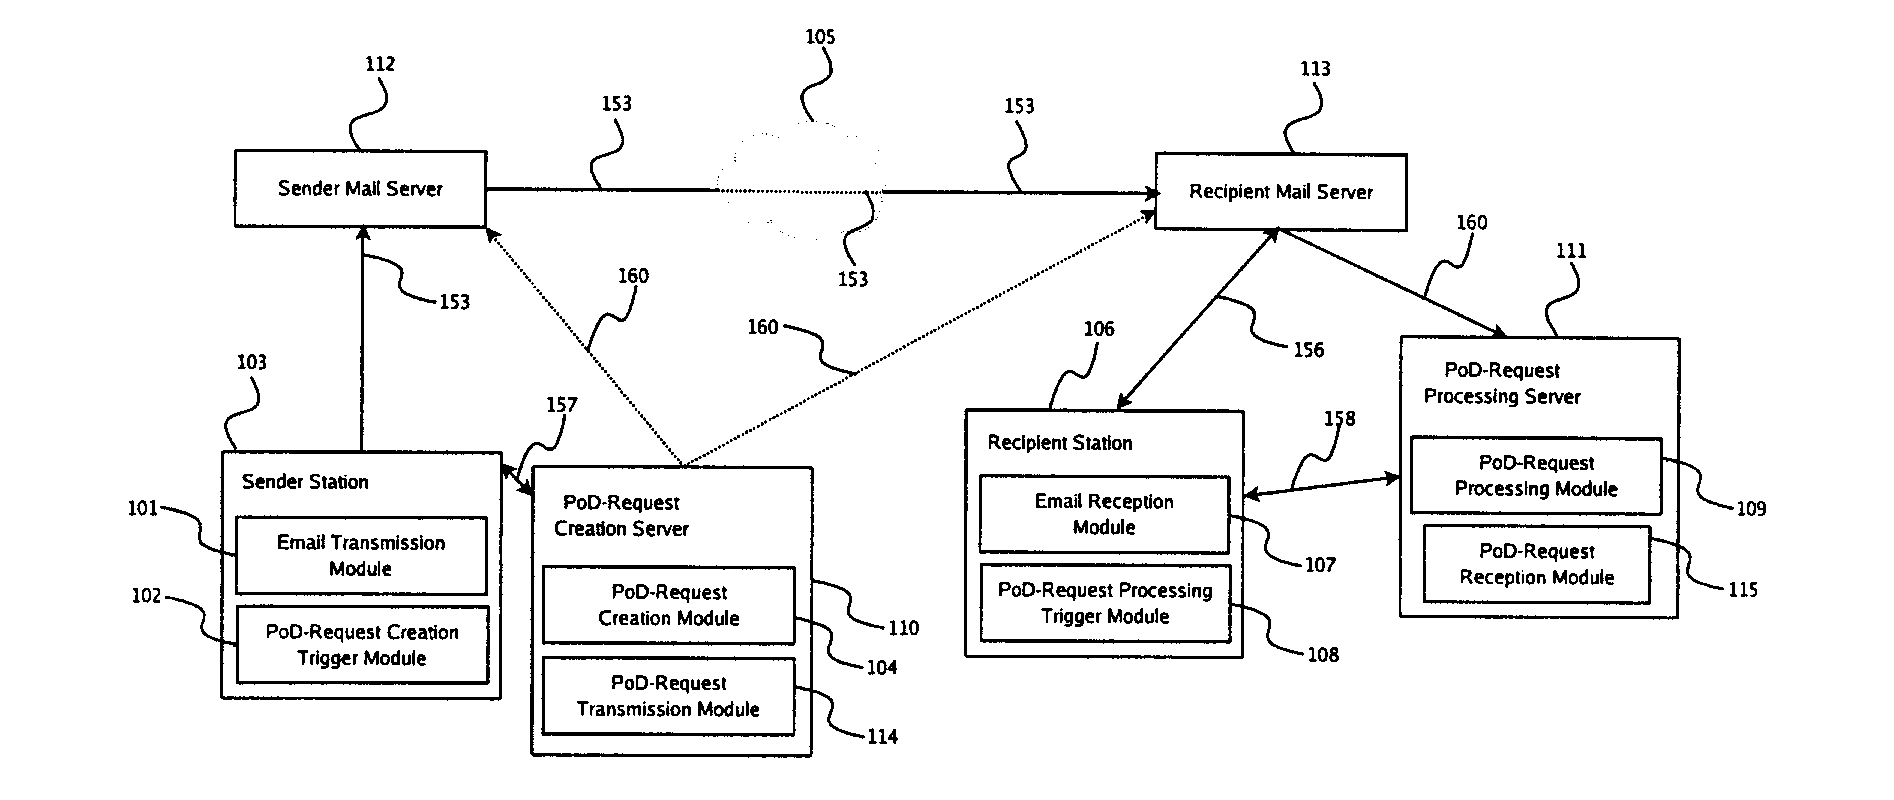 System and Method for Providing Certified Proof of Delivery Receipts for Electronic Mail